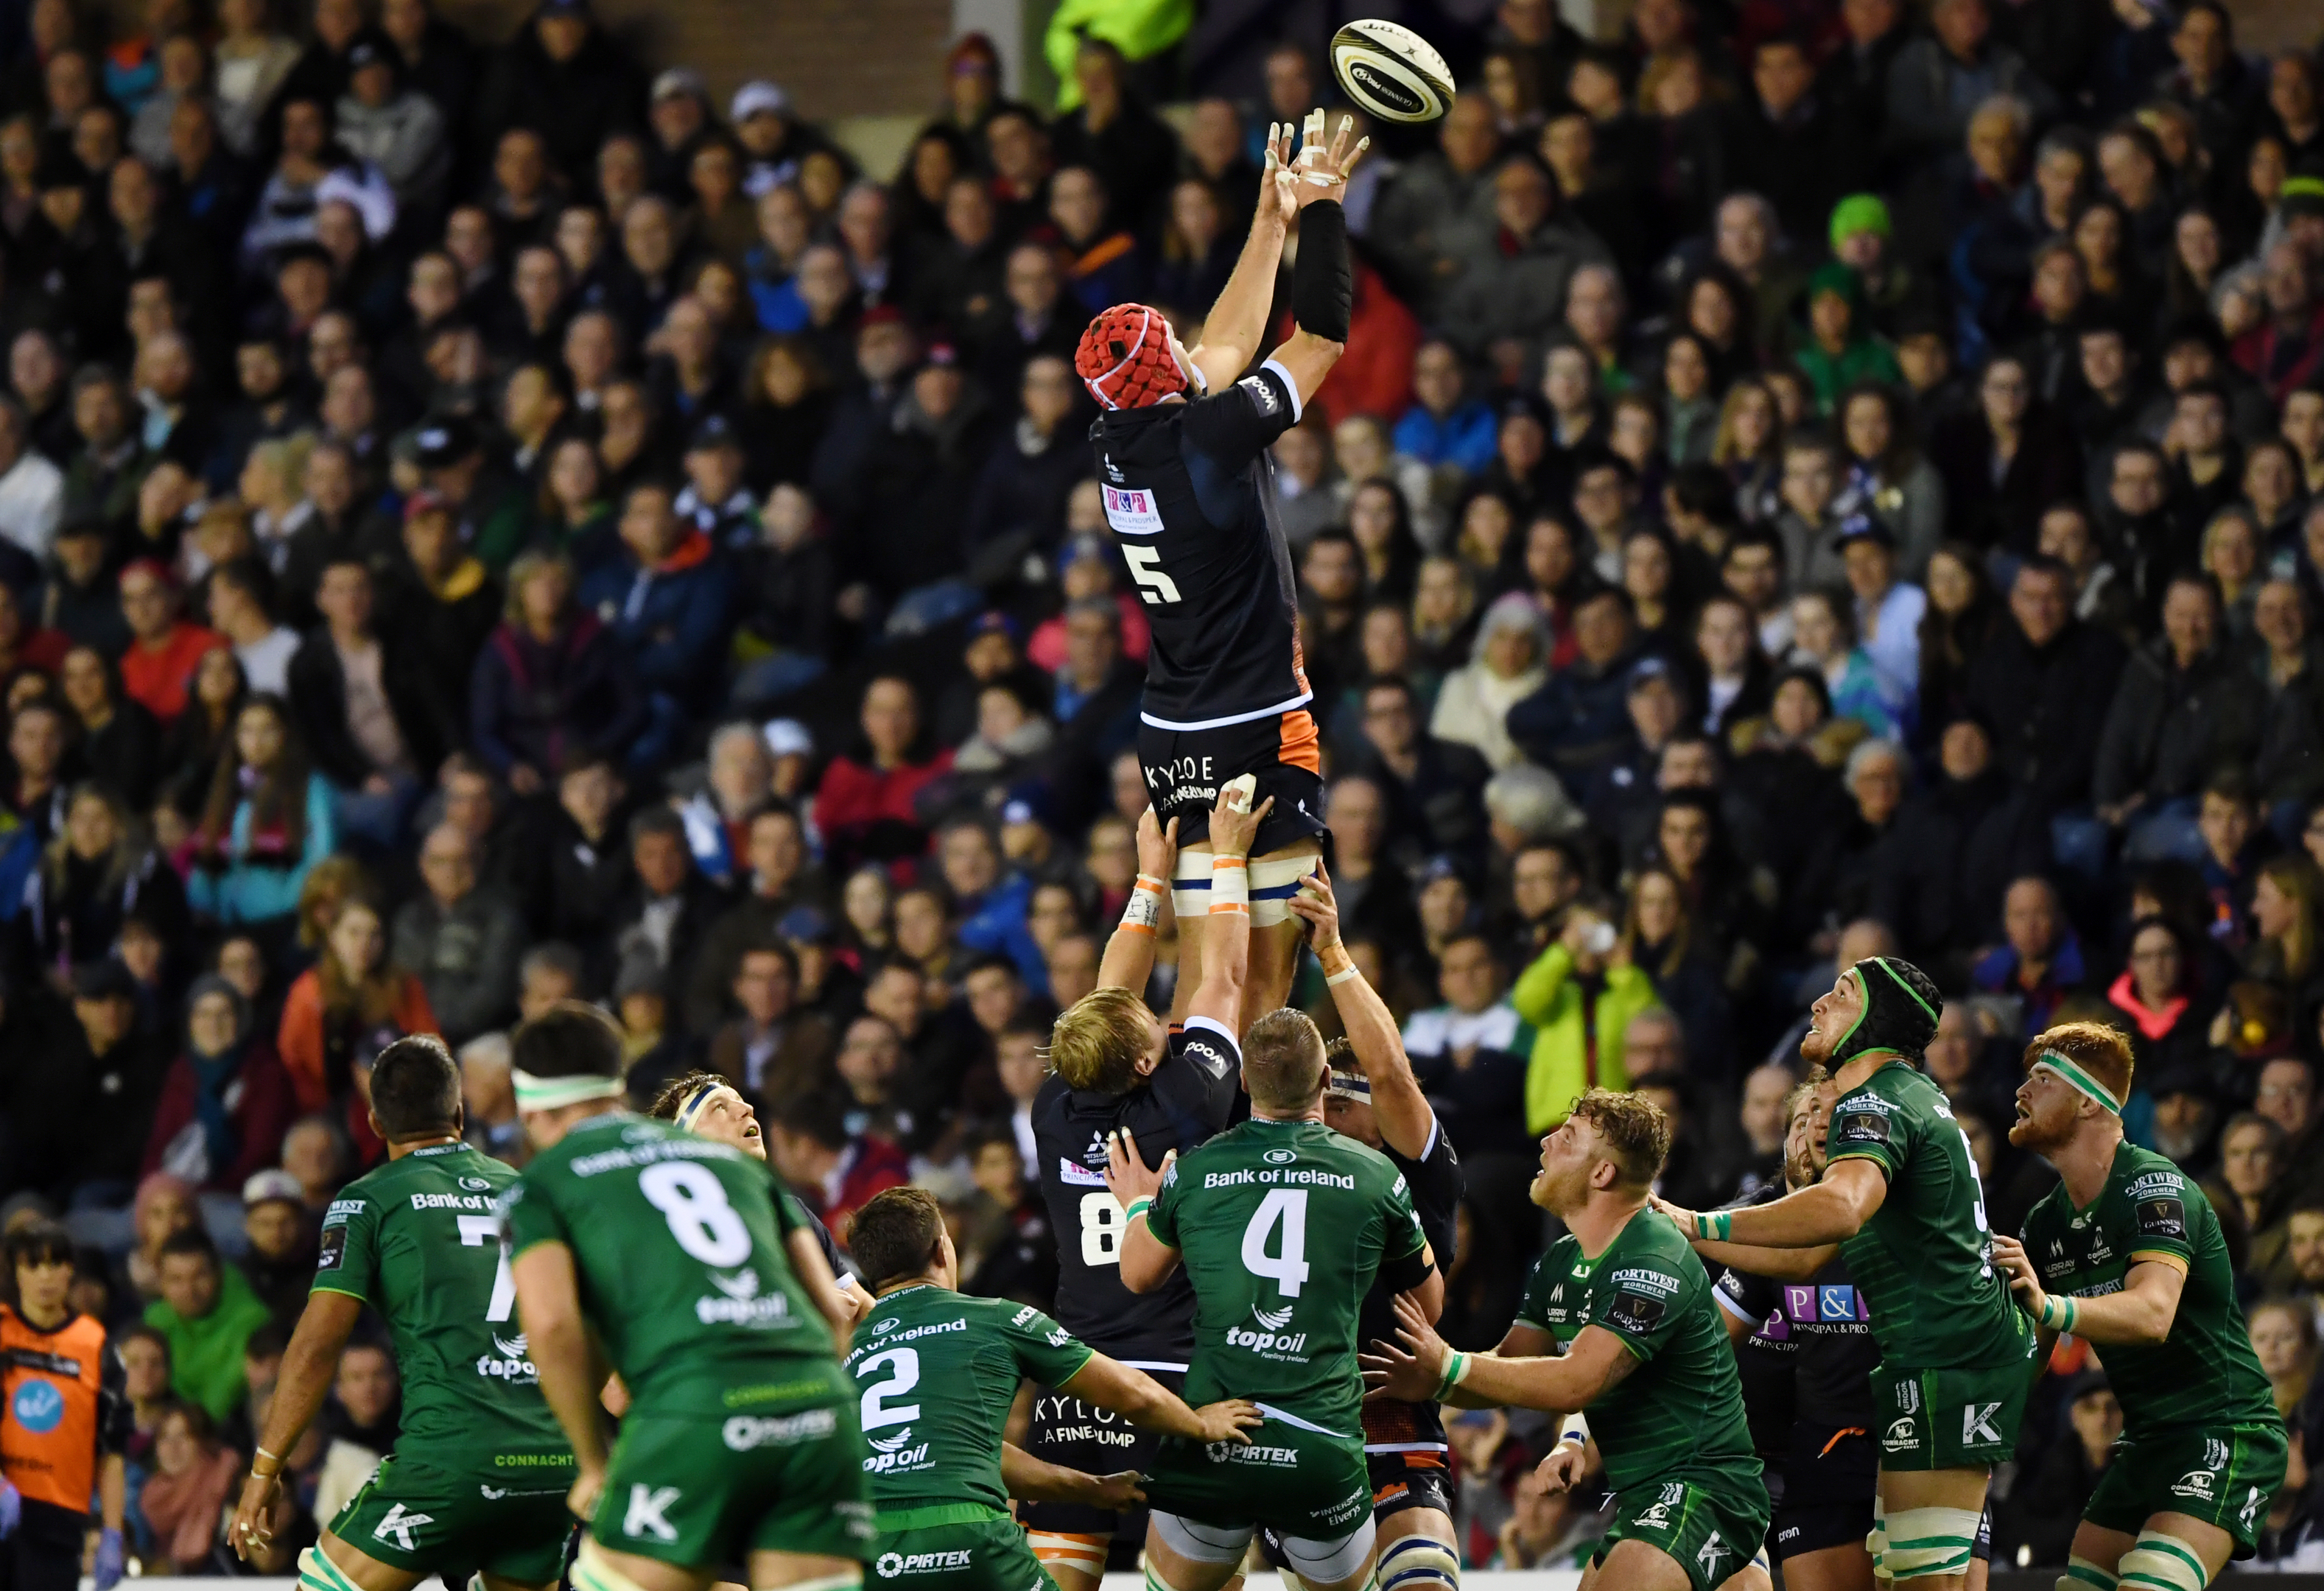 Grant Gilchrist takes this lineout, but the setpiece misfired for Edinburgh against Connacht.